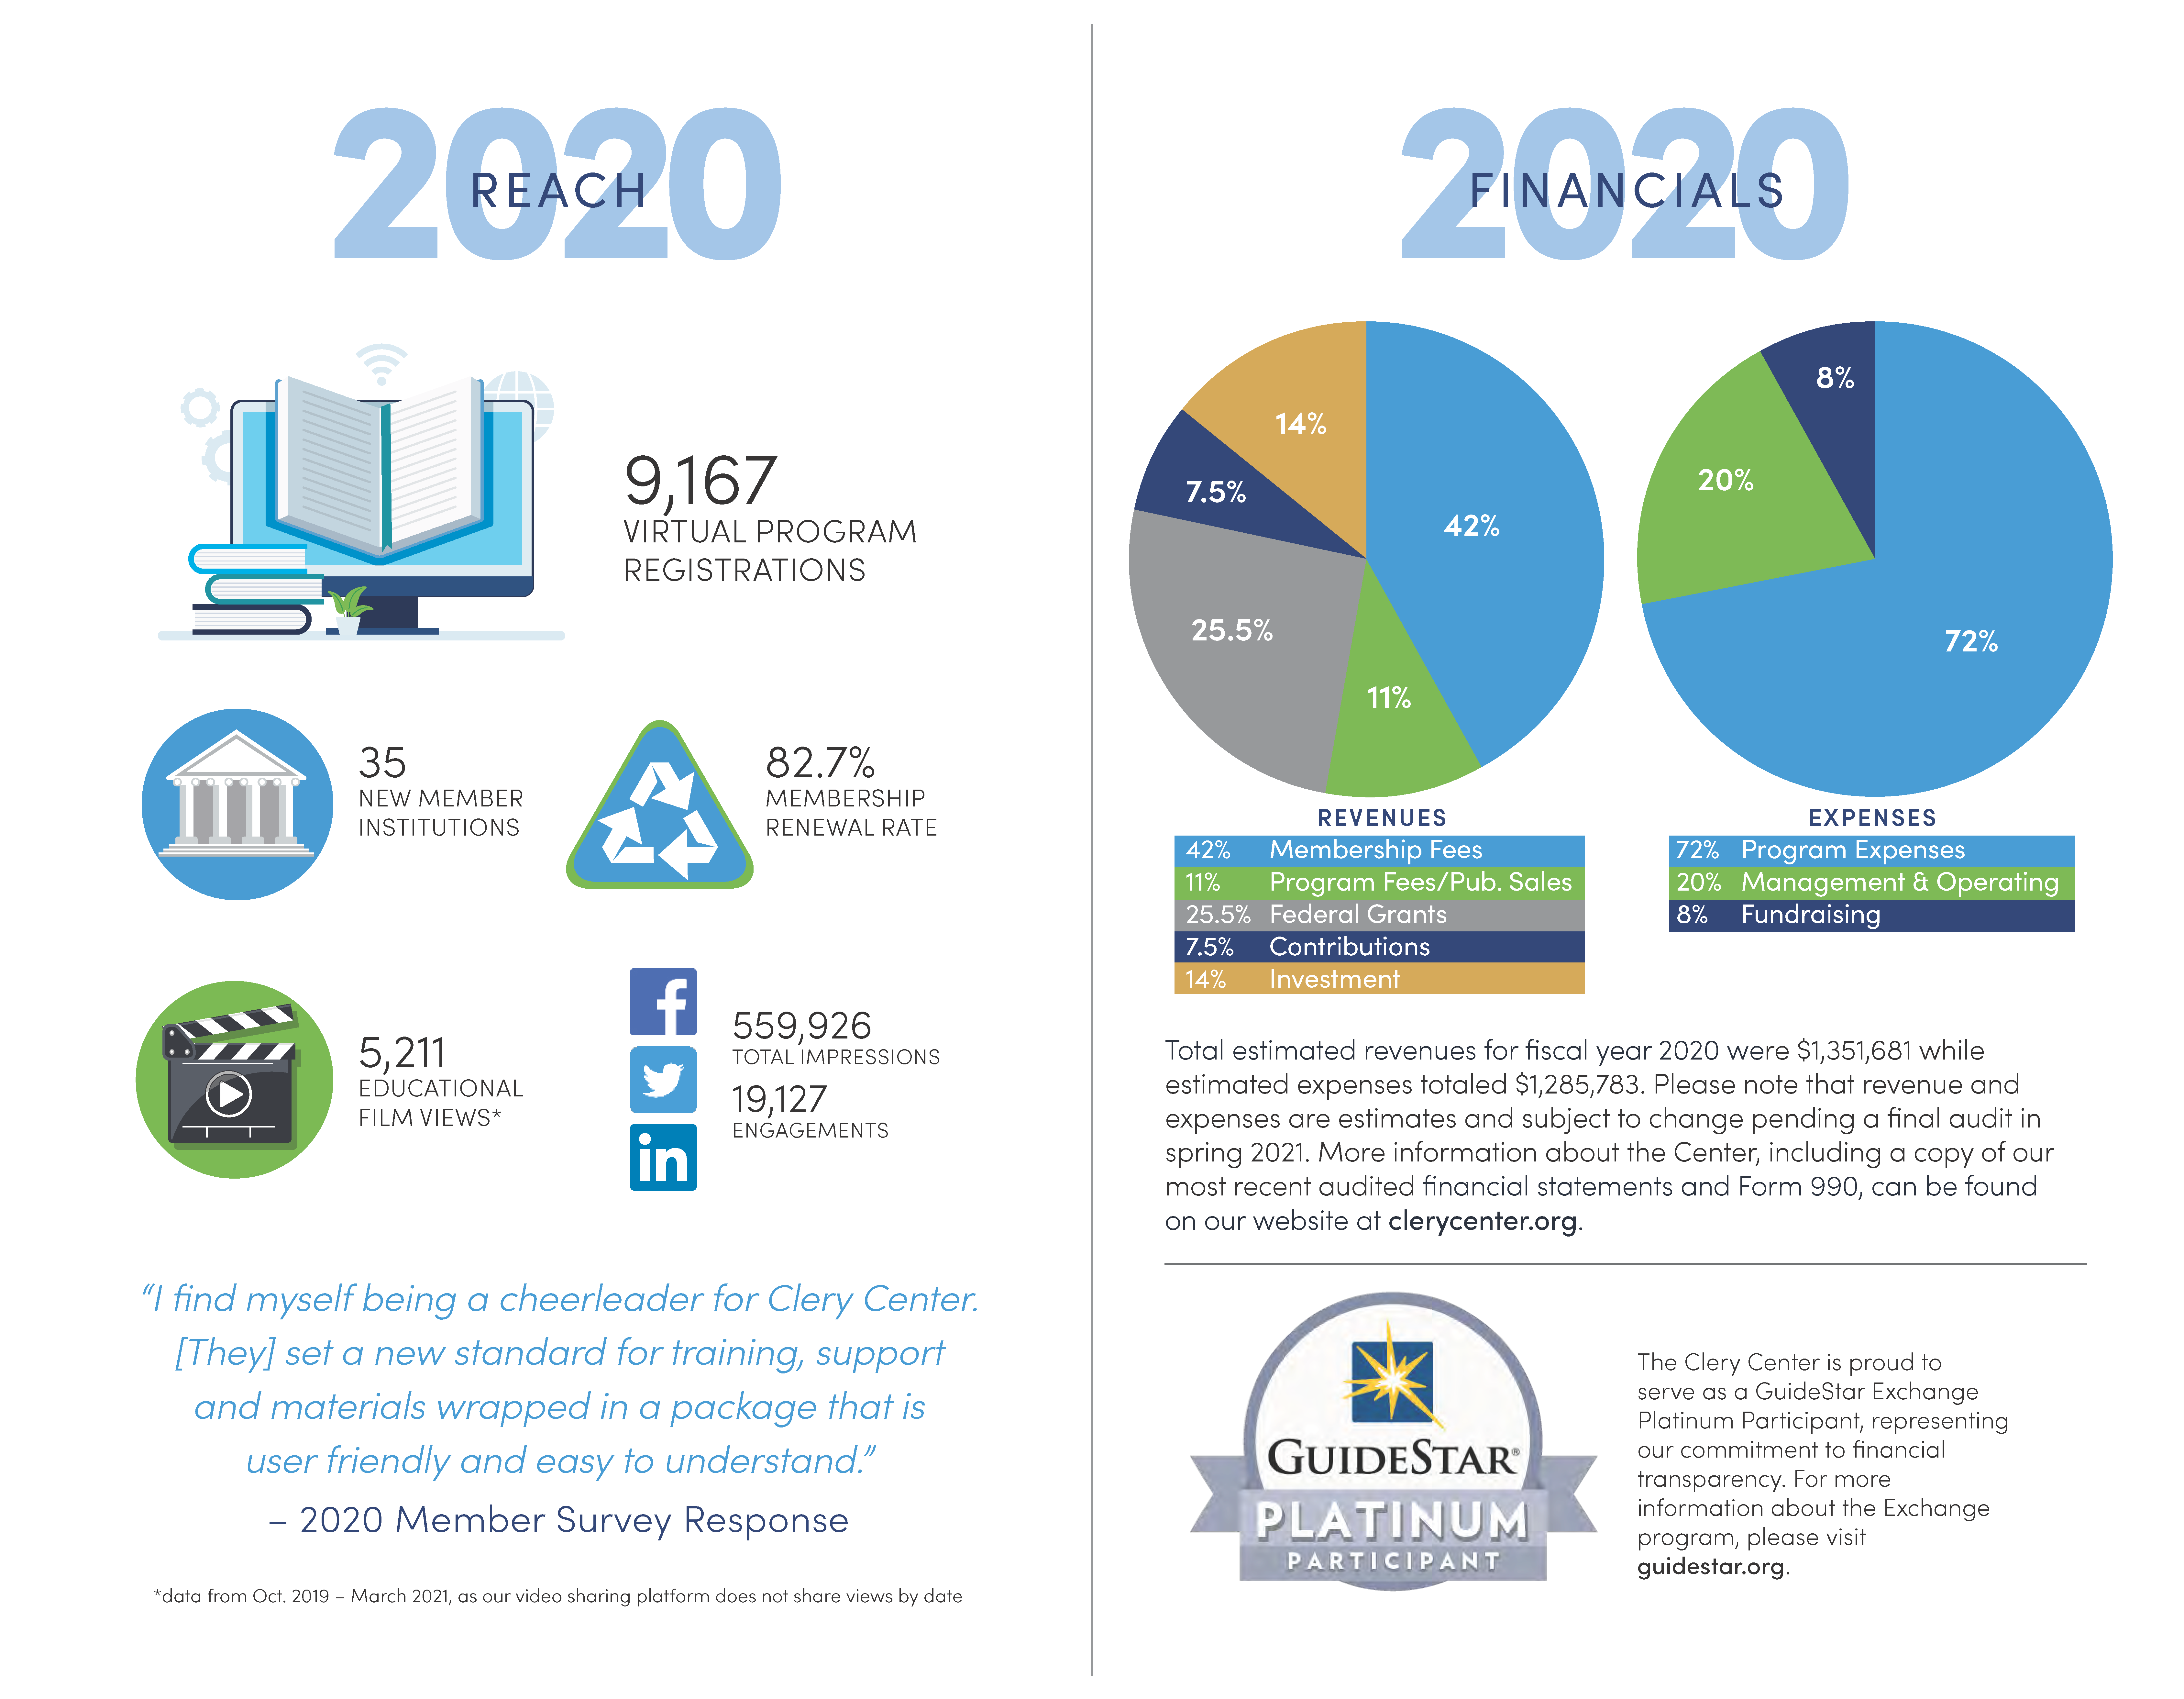 2020 Annual Report - page 6 image